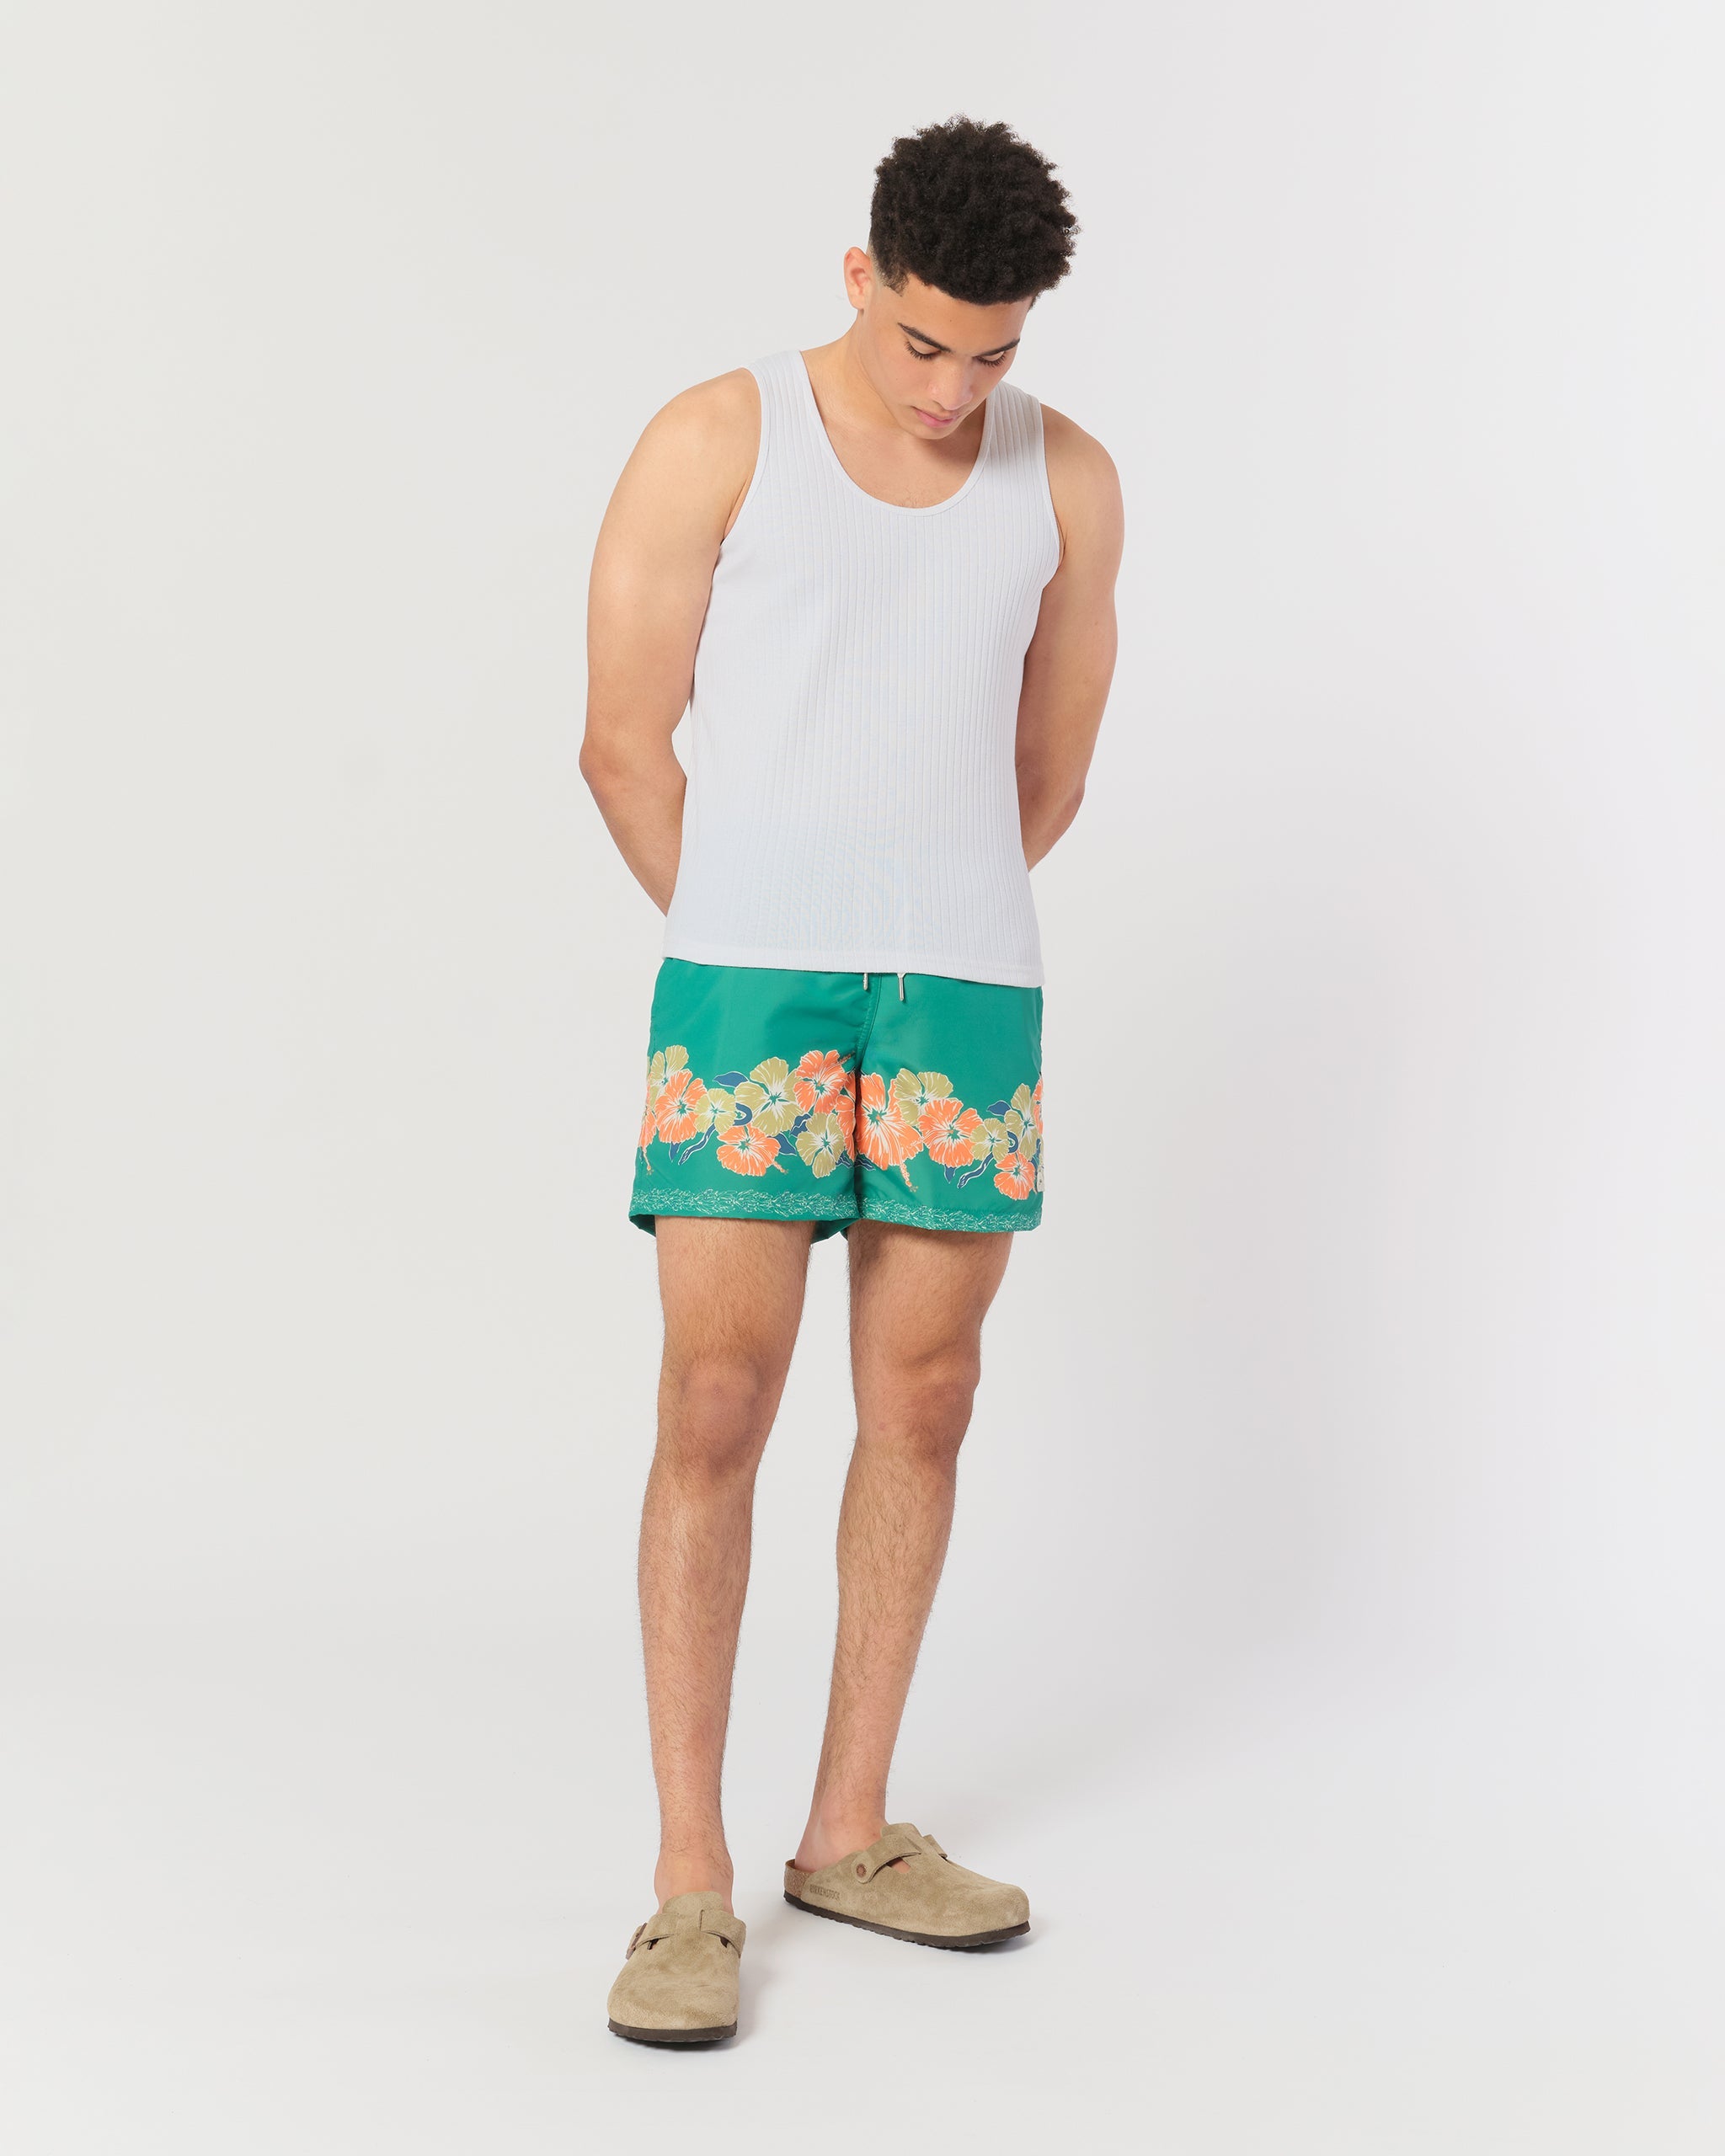 model wearing Green swim trunk with floral motif pattern on the bottom of the leg